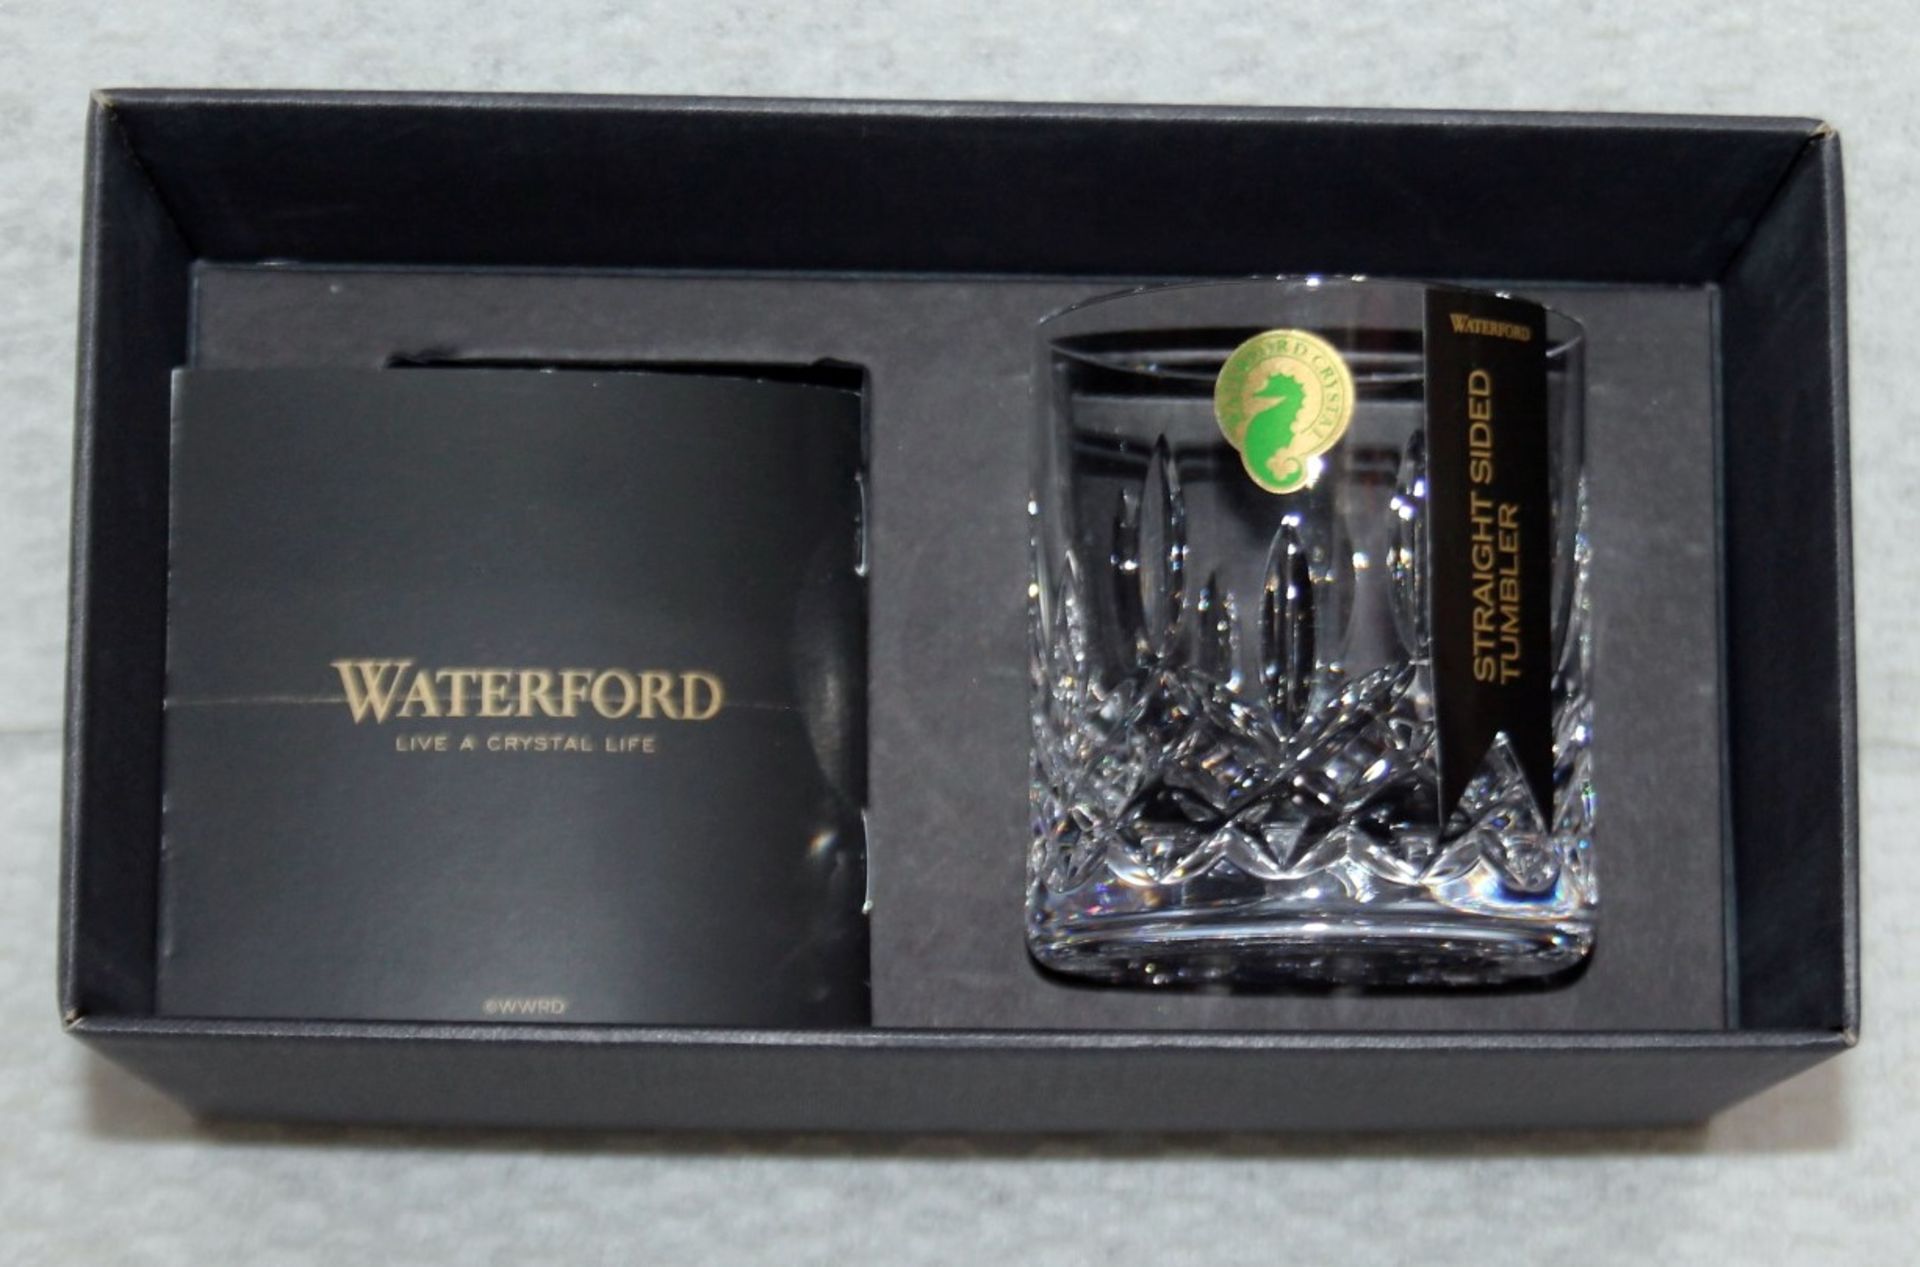 1 x WATERFORD CRYSTAL 'Lismore' Old Fashioned Tumbler - Original Price £55.00 - Unused Boxed Stock - Image 5 of 6